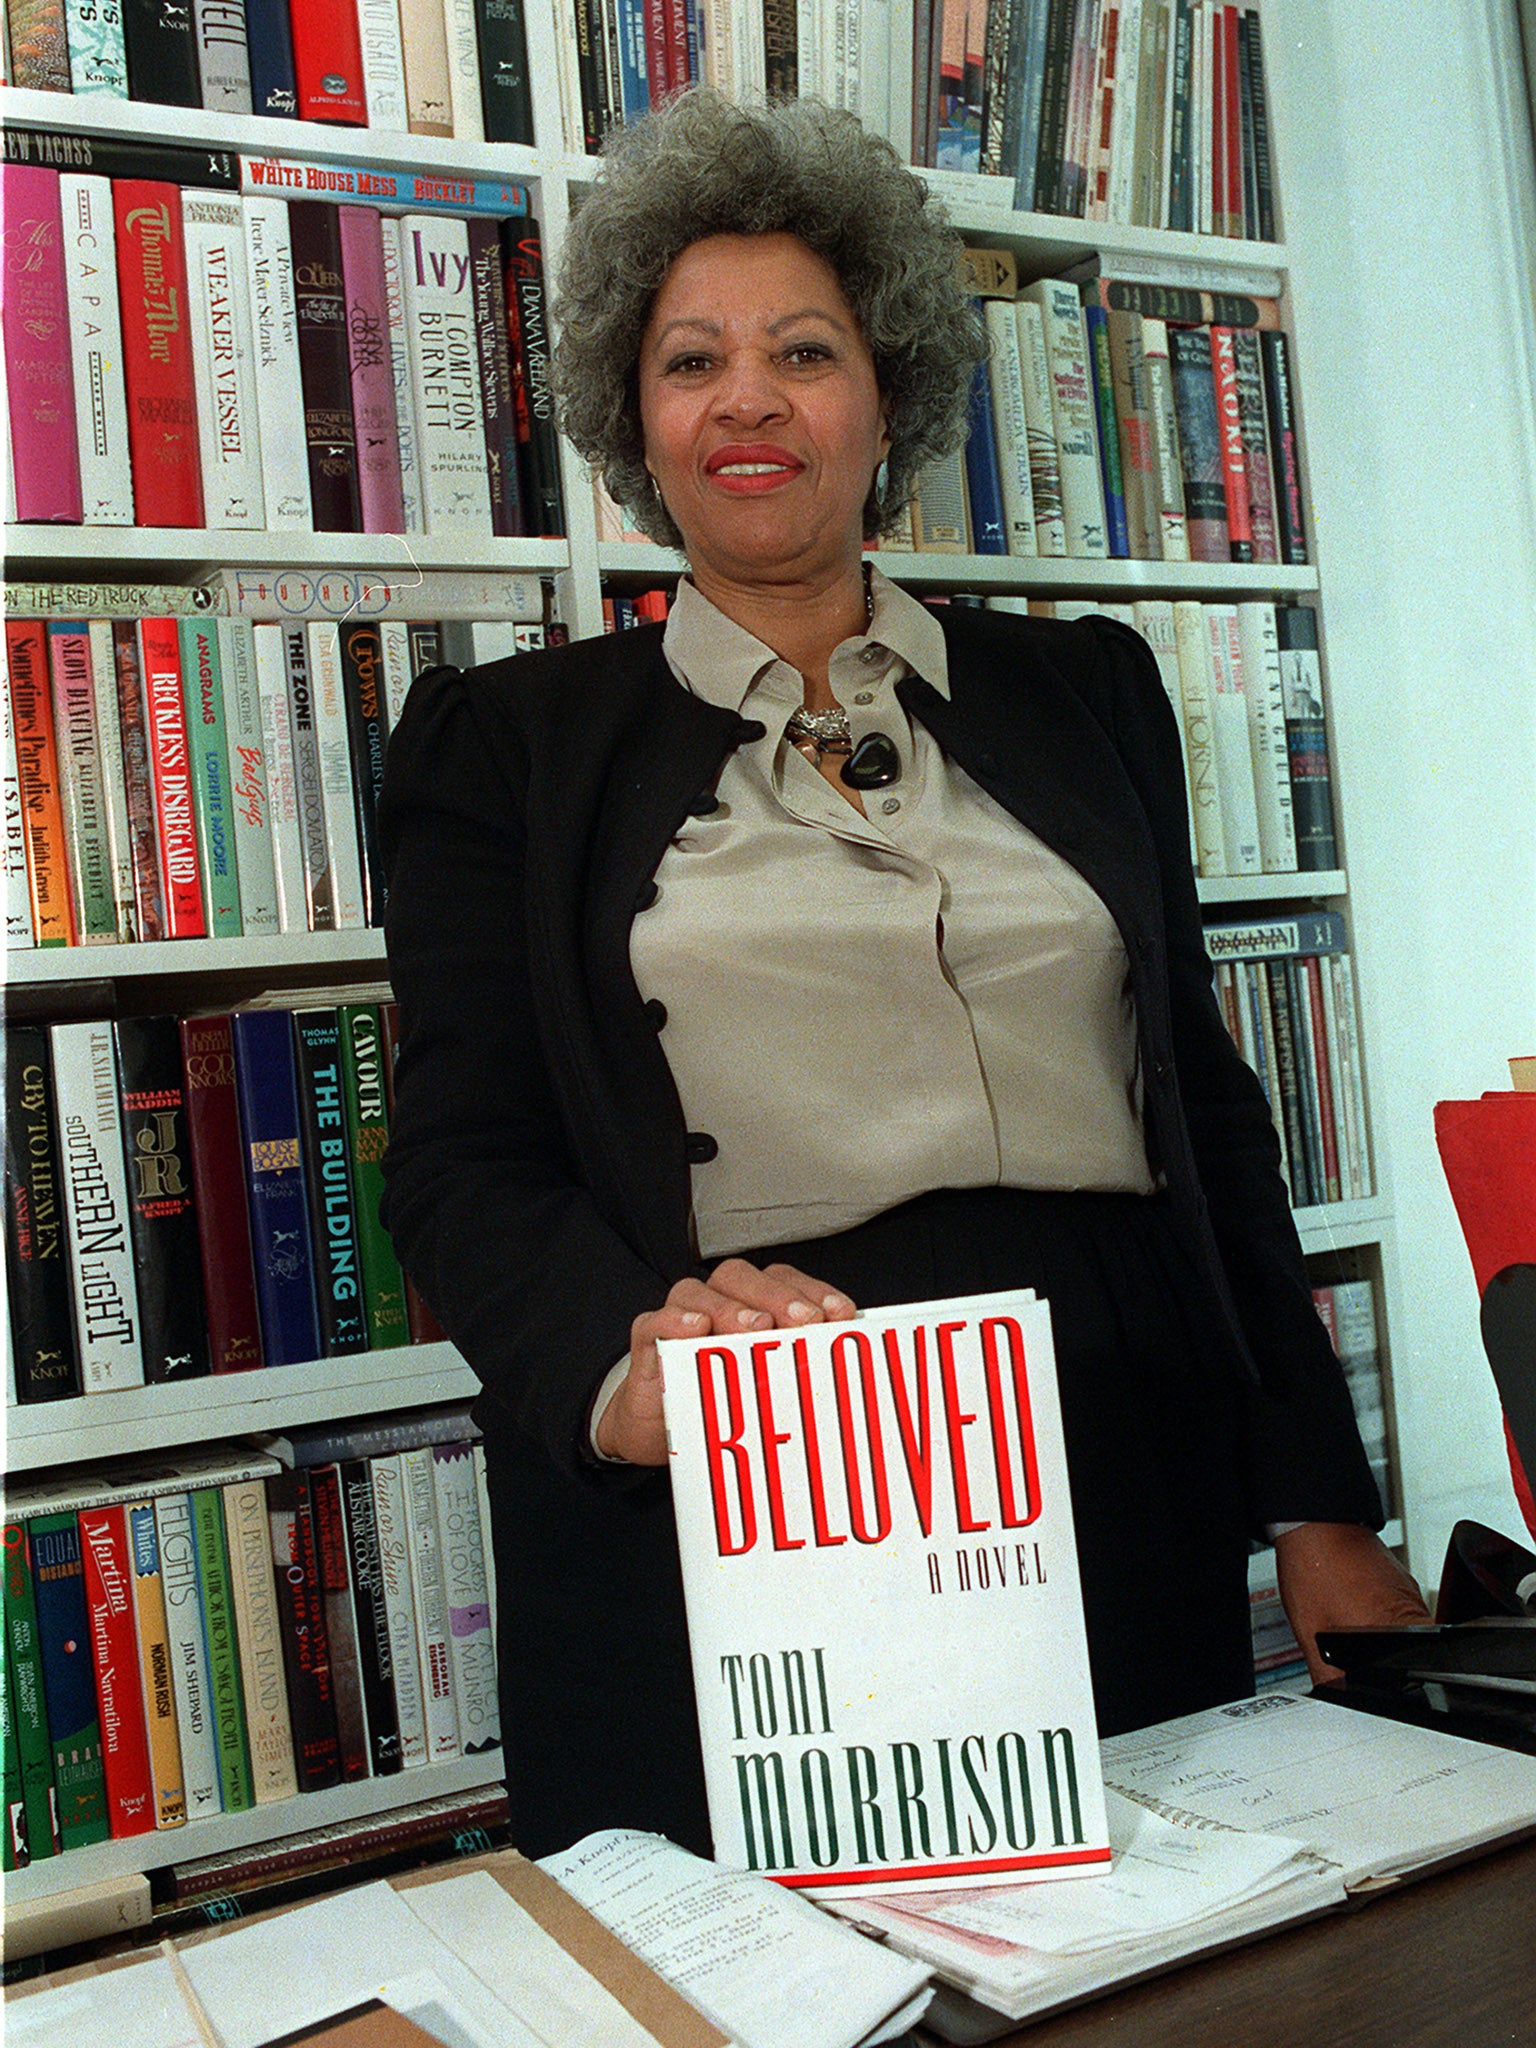 Morrison in 1987 promoting her book ‘Beloved’, soon to become one of the most celebrated novels of all time